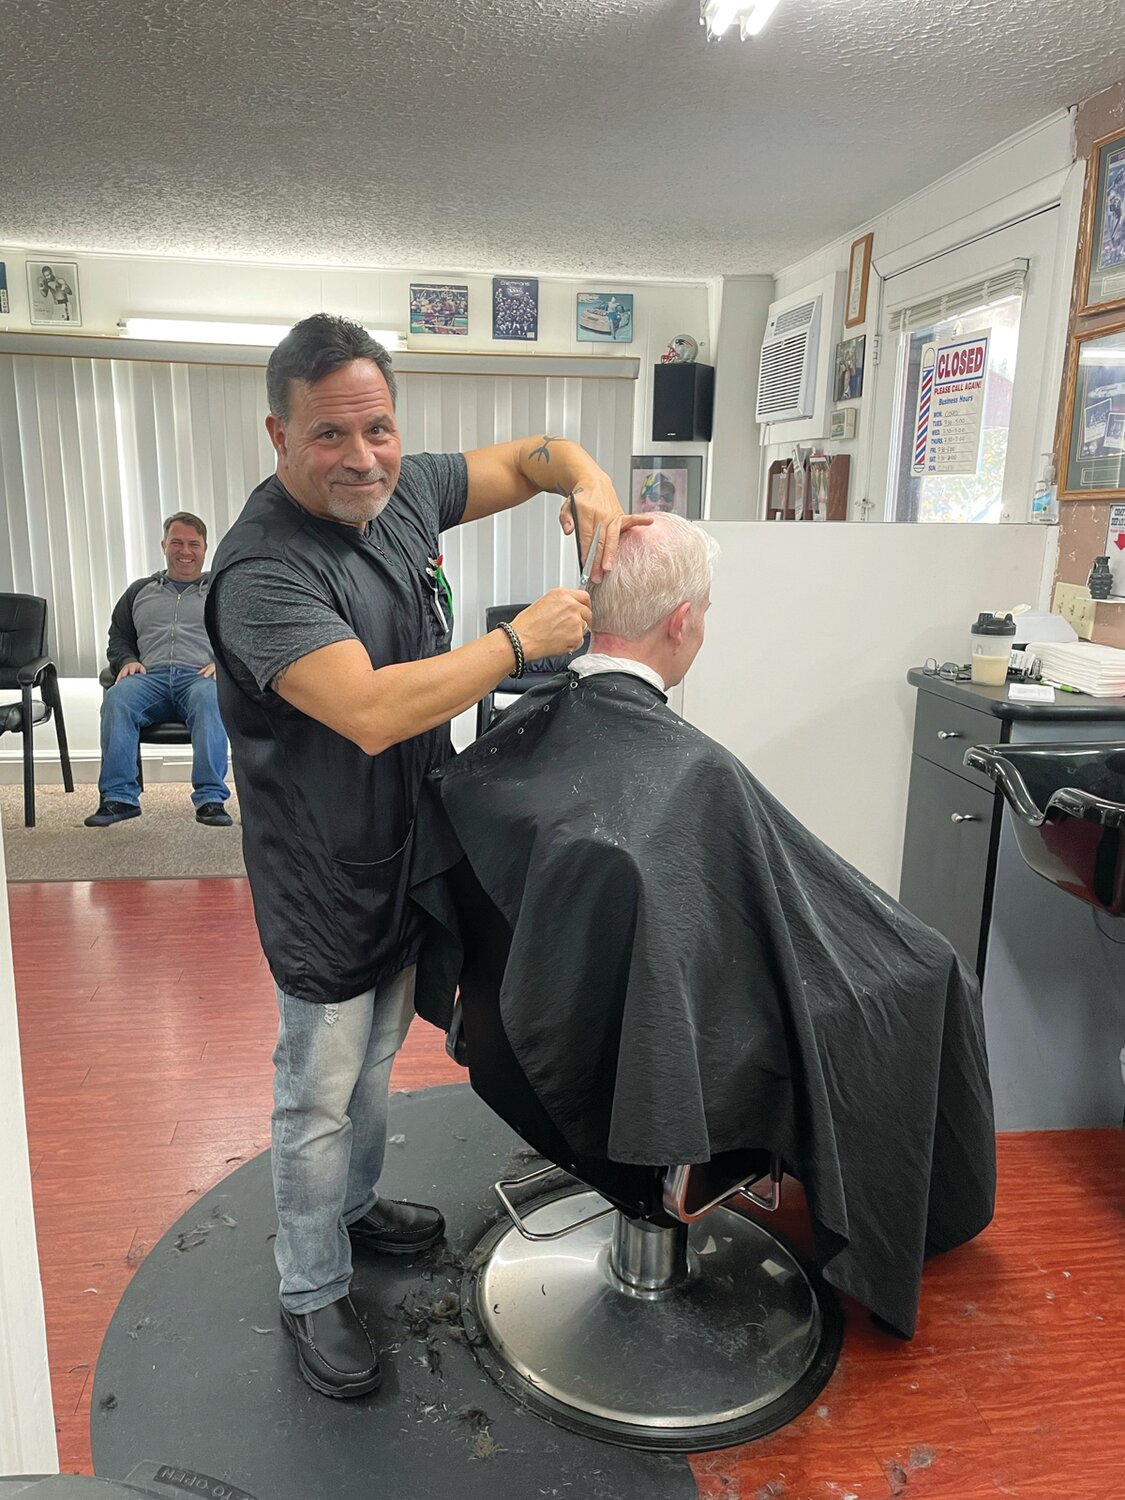 Clients of Dave Picozzi, the salon’s owner and longtime barber, will now be available by appointment only. Book your appointment today on Vagaro.com.